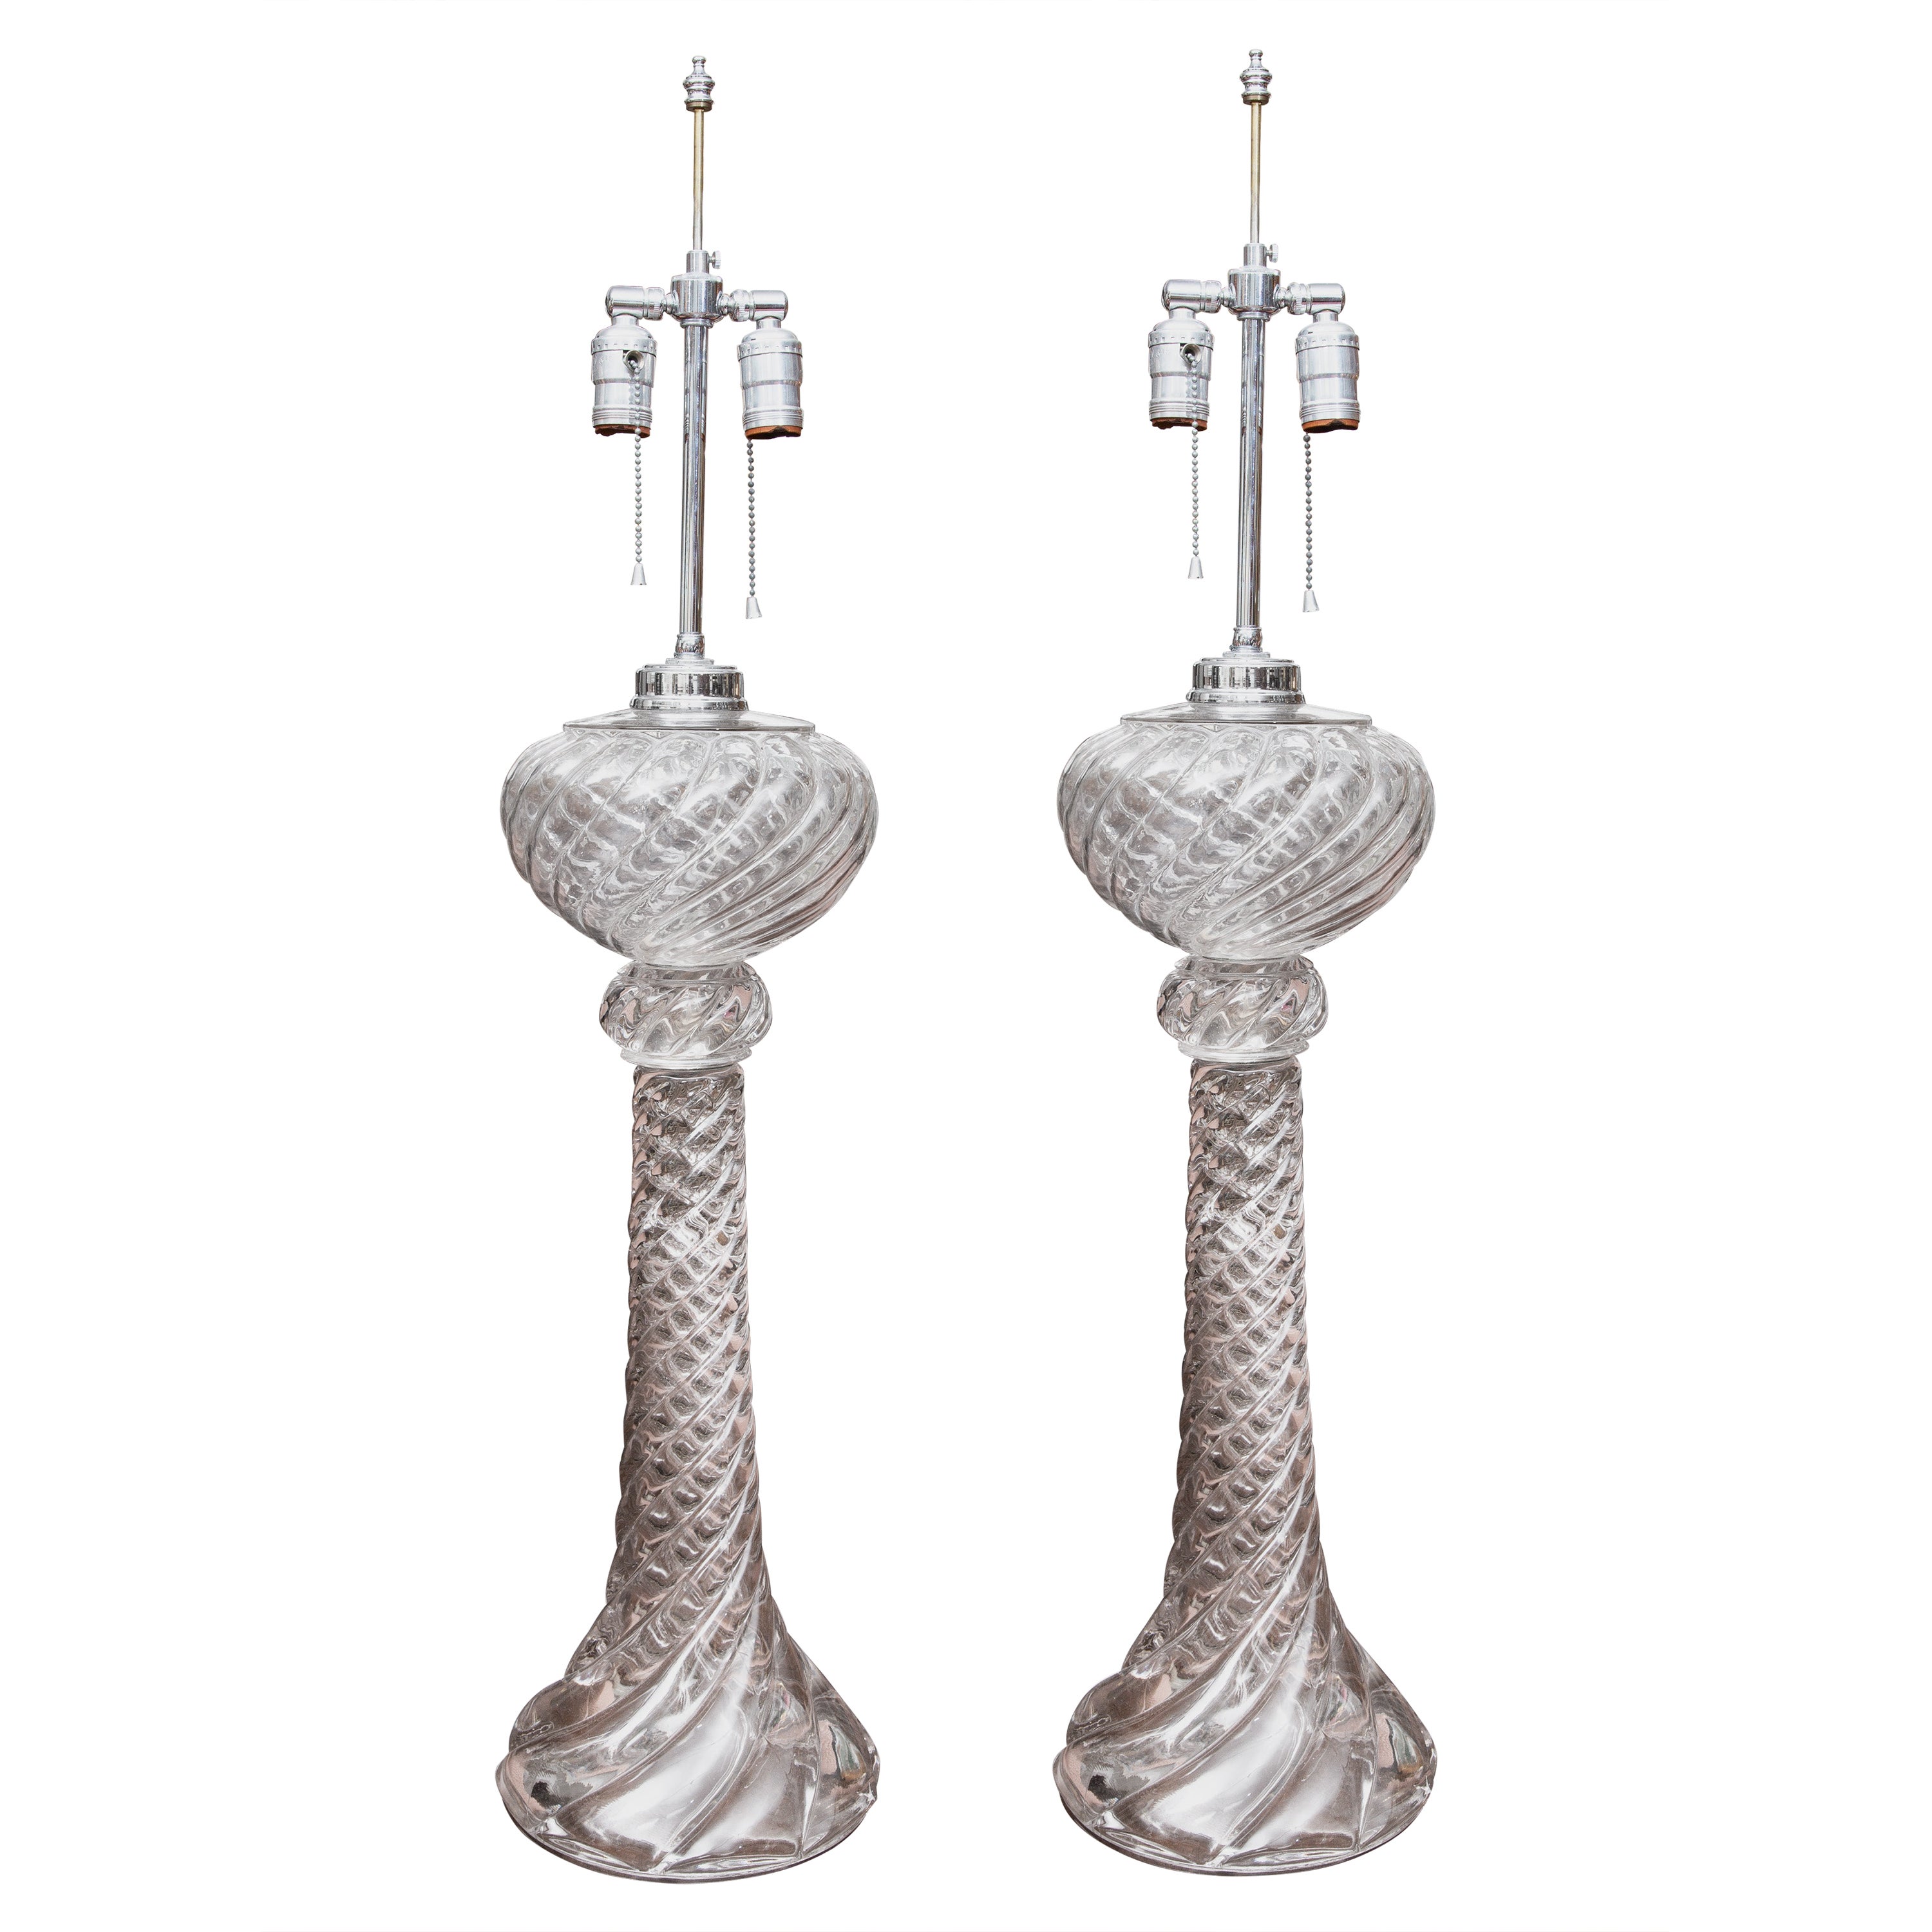 Pair of Baccarat Glass Lamps with a Swirl Design For Sale